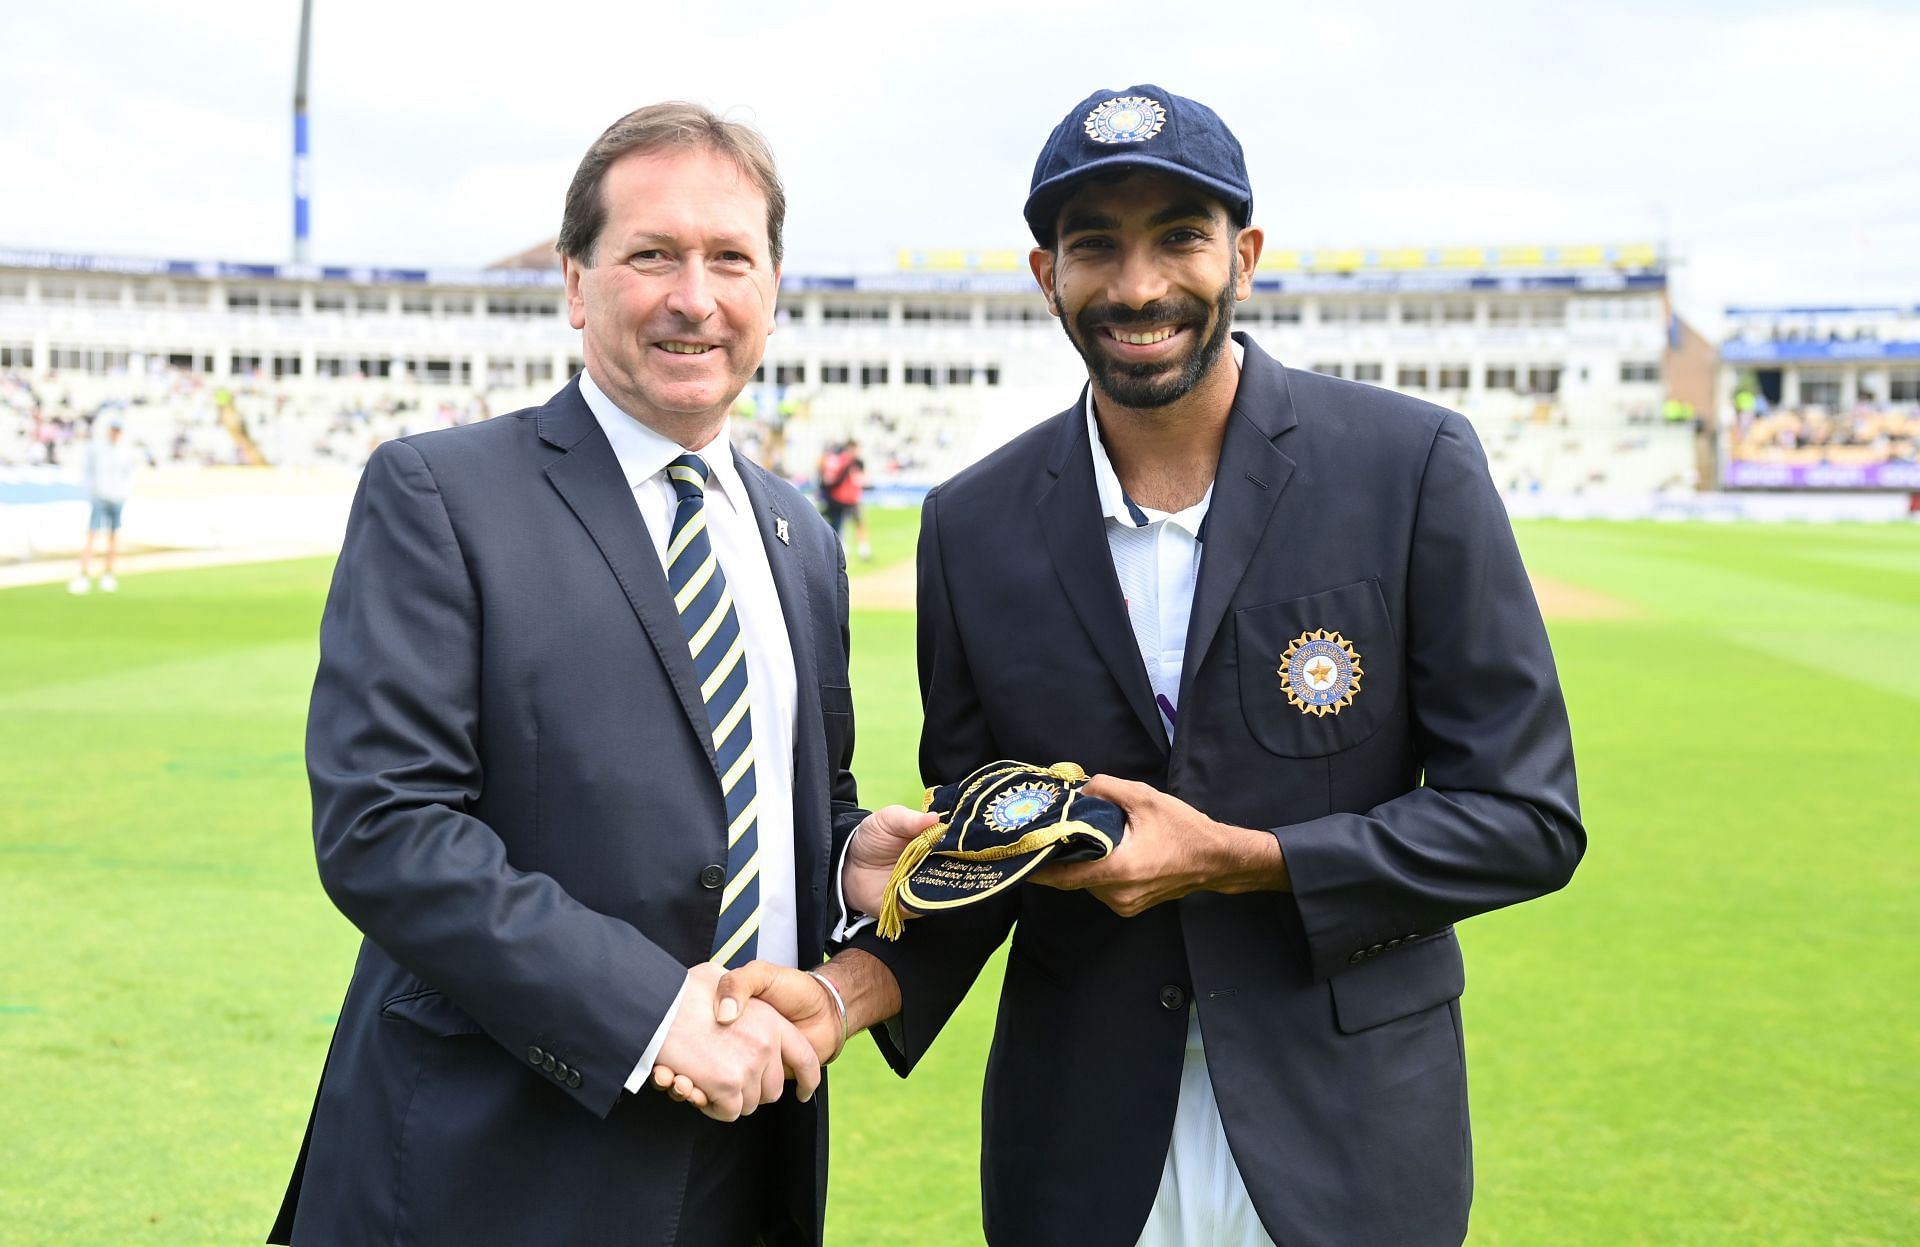 Jasprit Bumrah has captained India three times in his career.